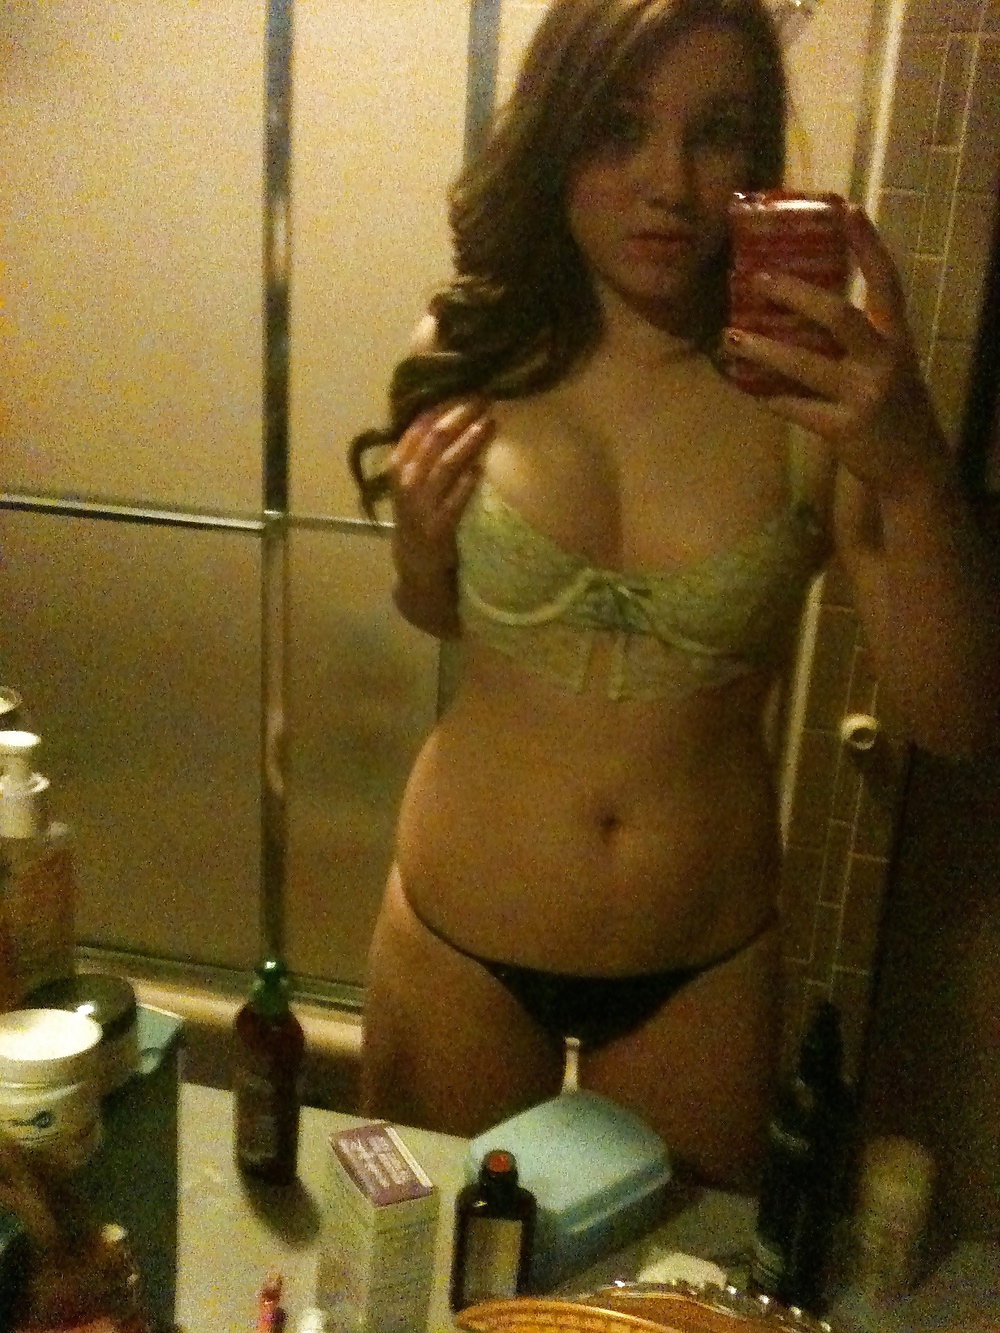 Sexy teen with mirror nudes pict gal